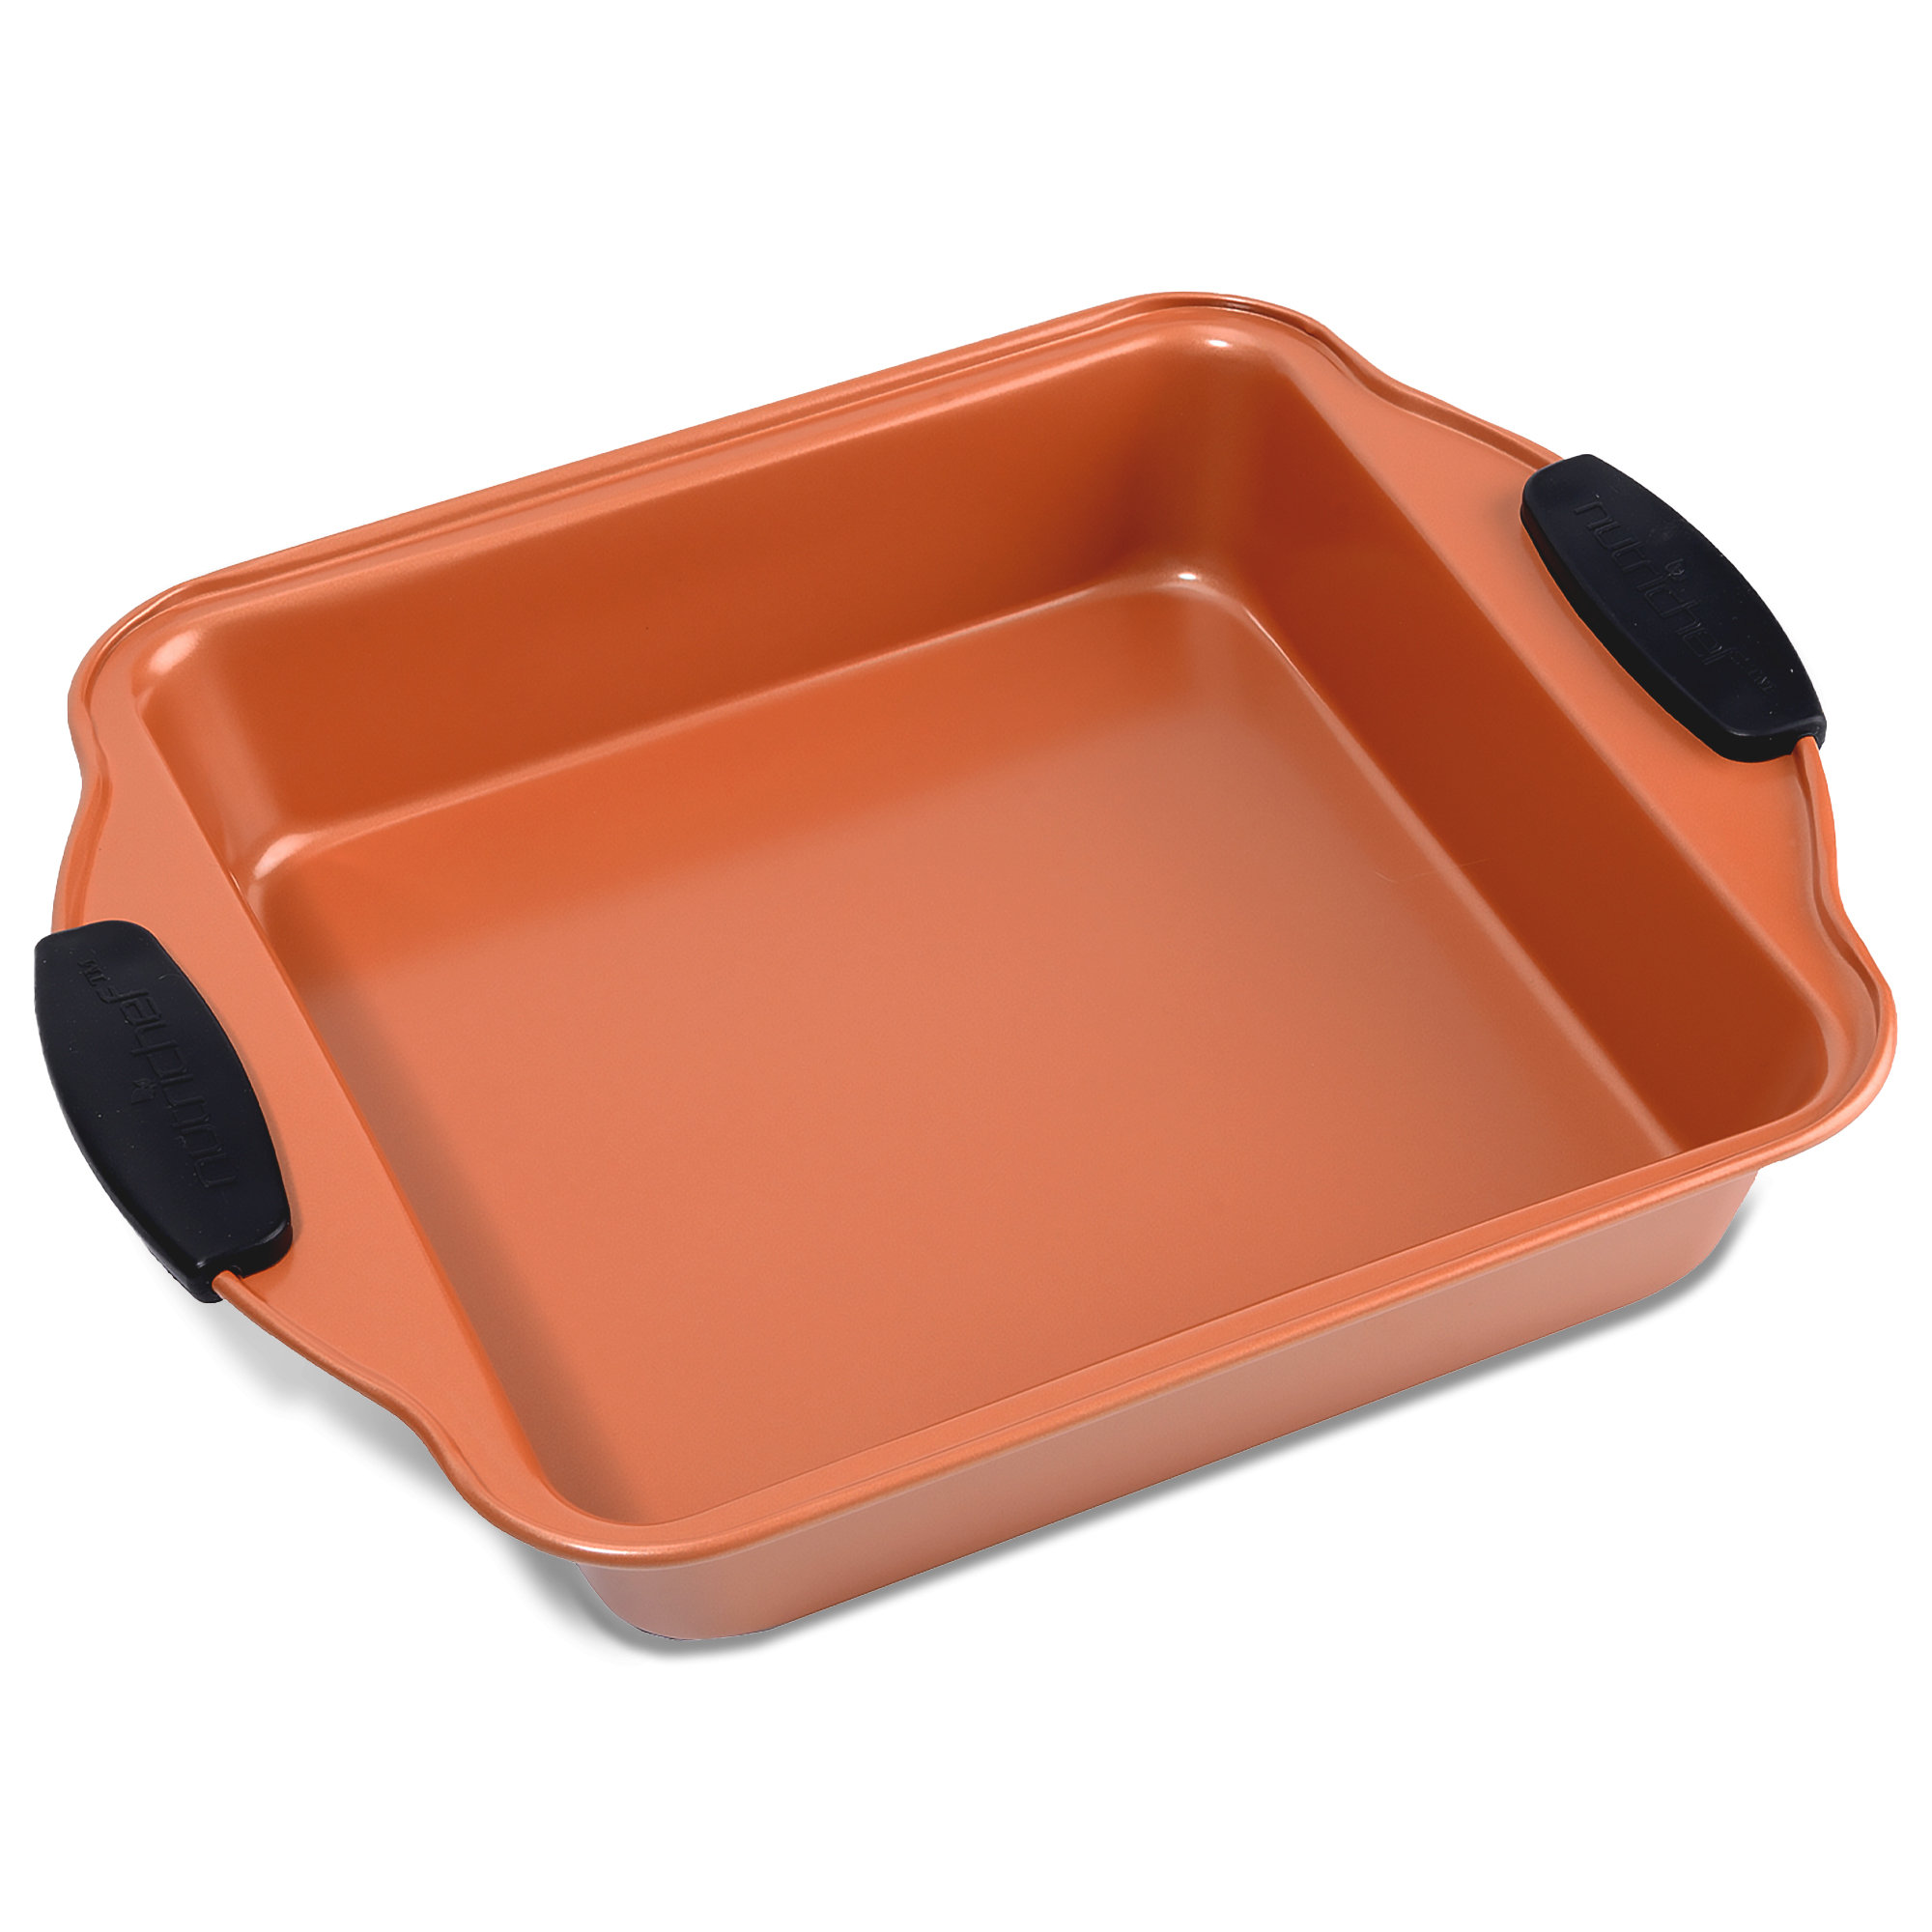 NutriChef Non-Stick Loaf Pan - Deluxe Nonstick Blue Coating Inside and  Outside with Red Silicone Handles